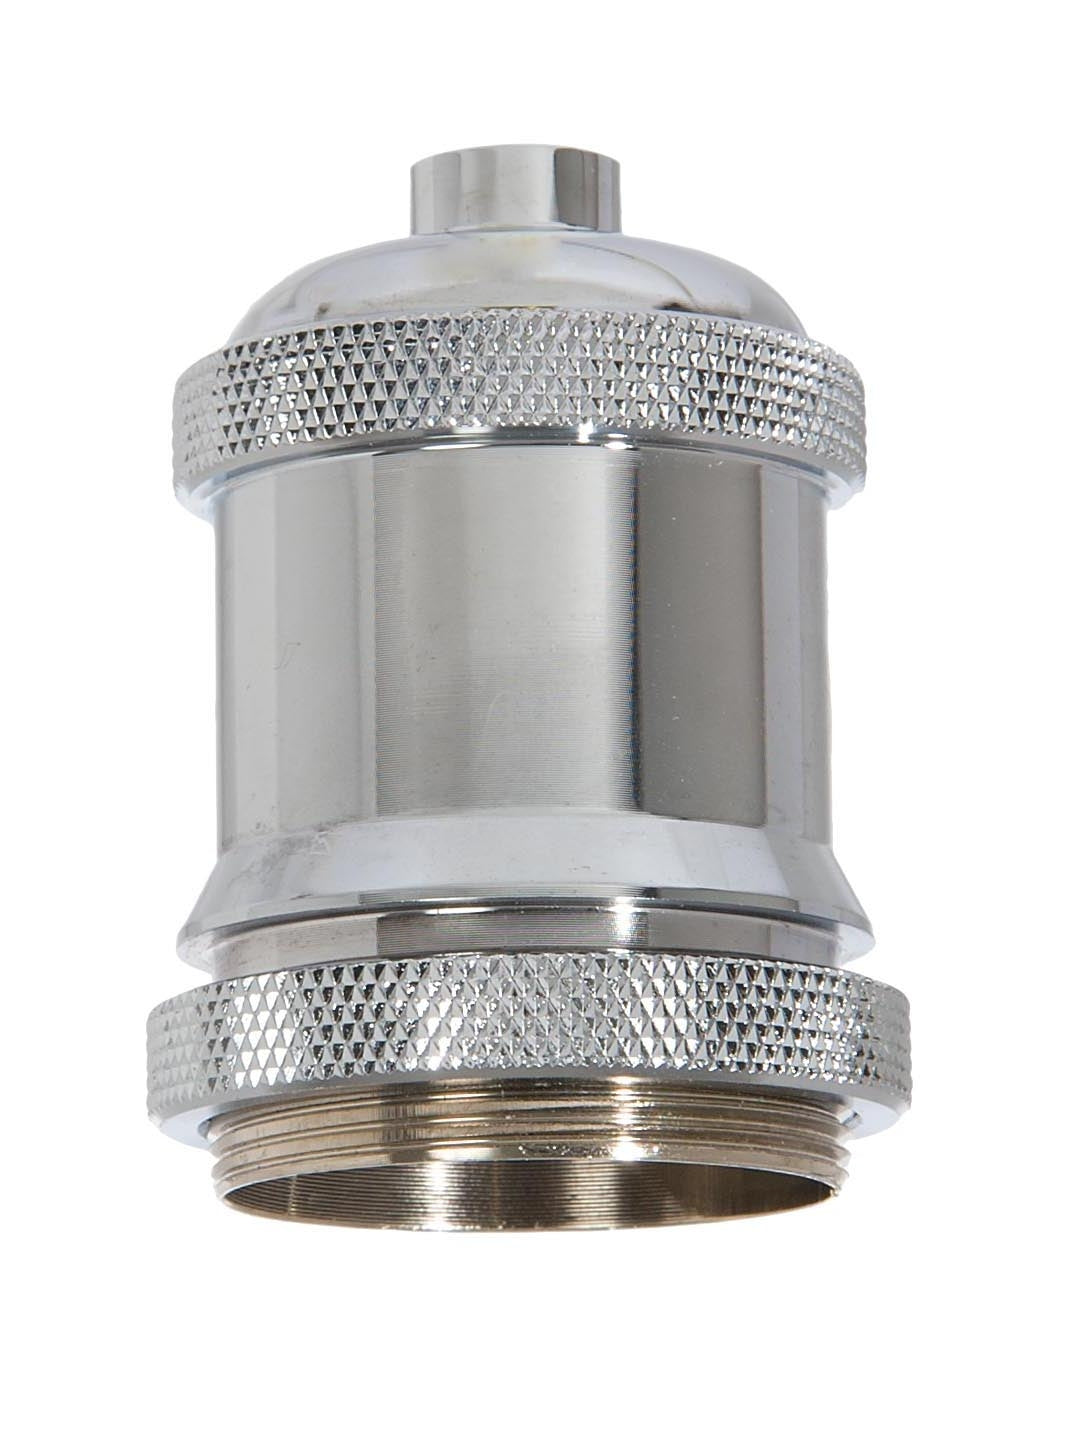 Polished Nickel Finish Die Cast Aluminum E-26 Socket Cover with E-26 Socket and Mounting Hardware